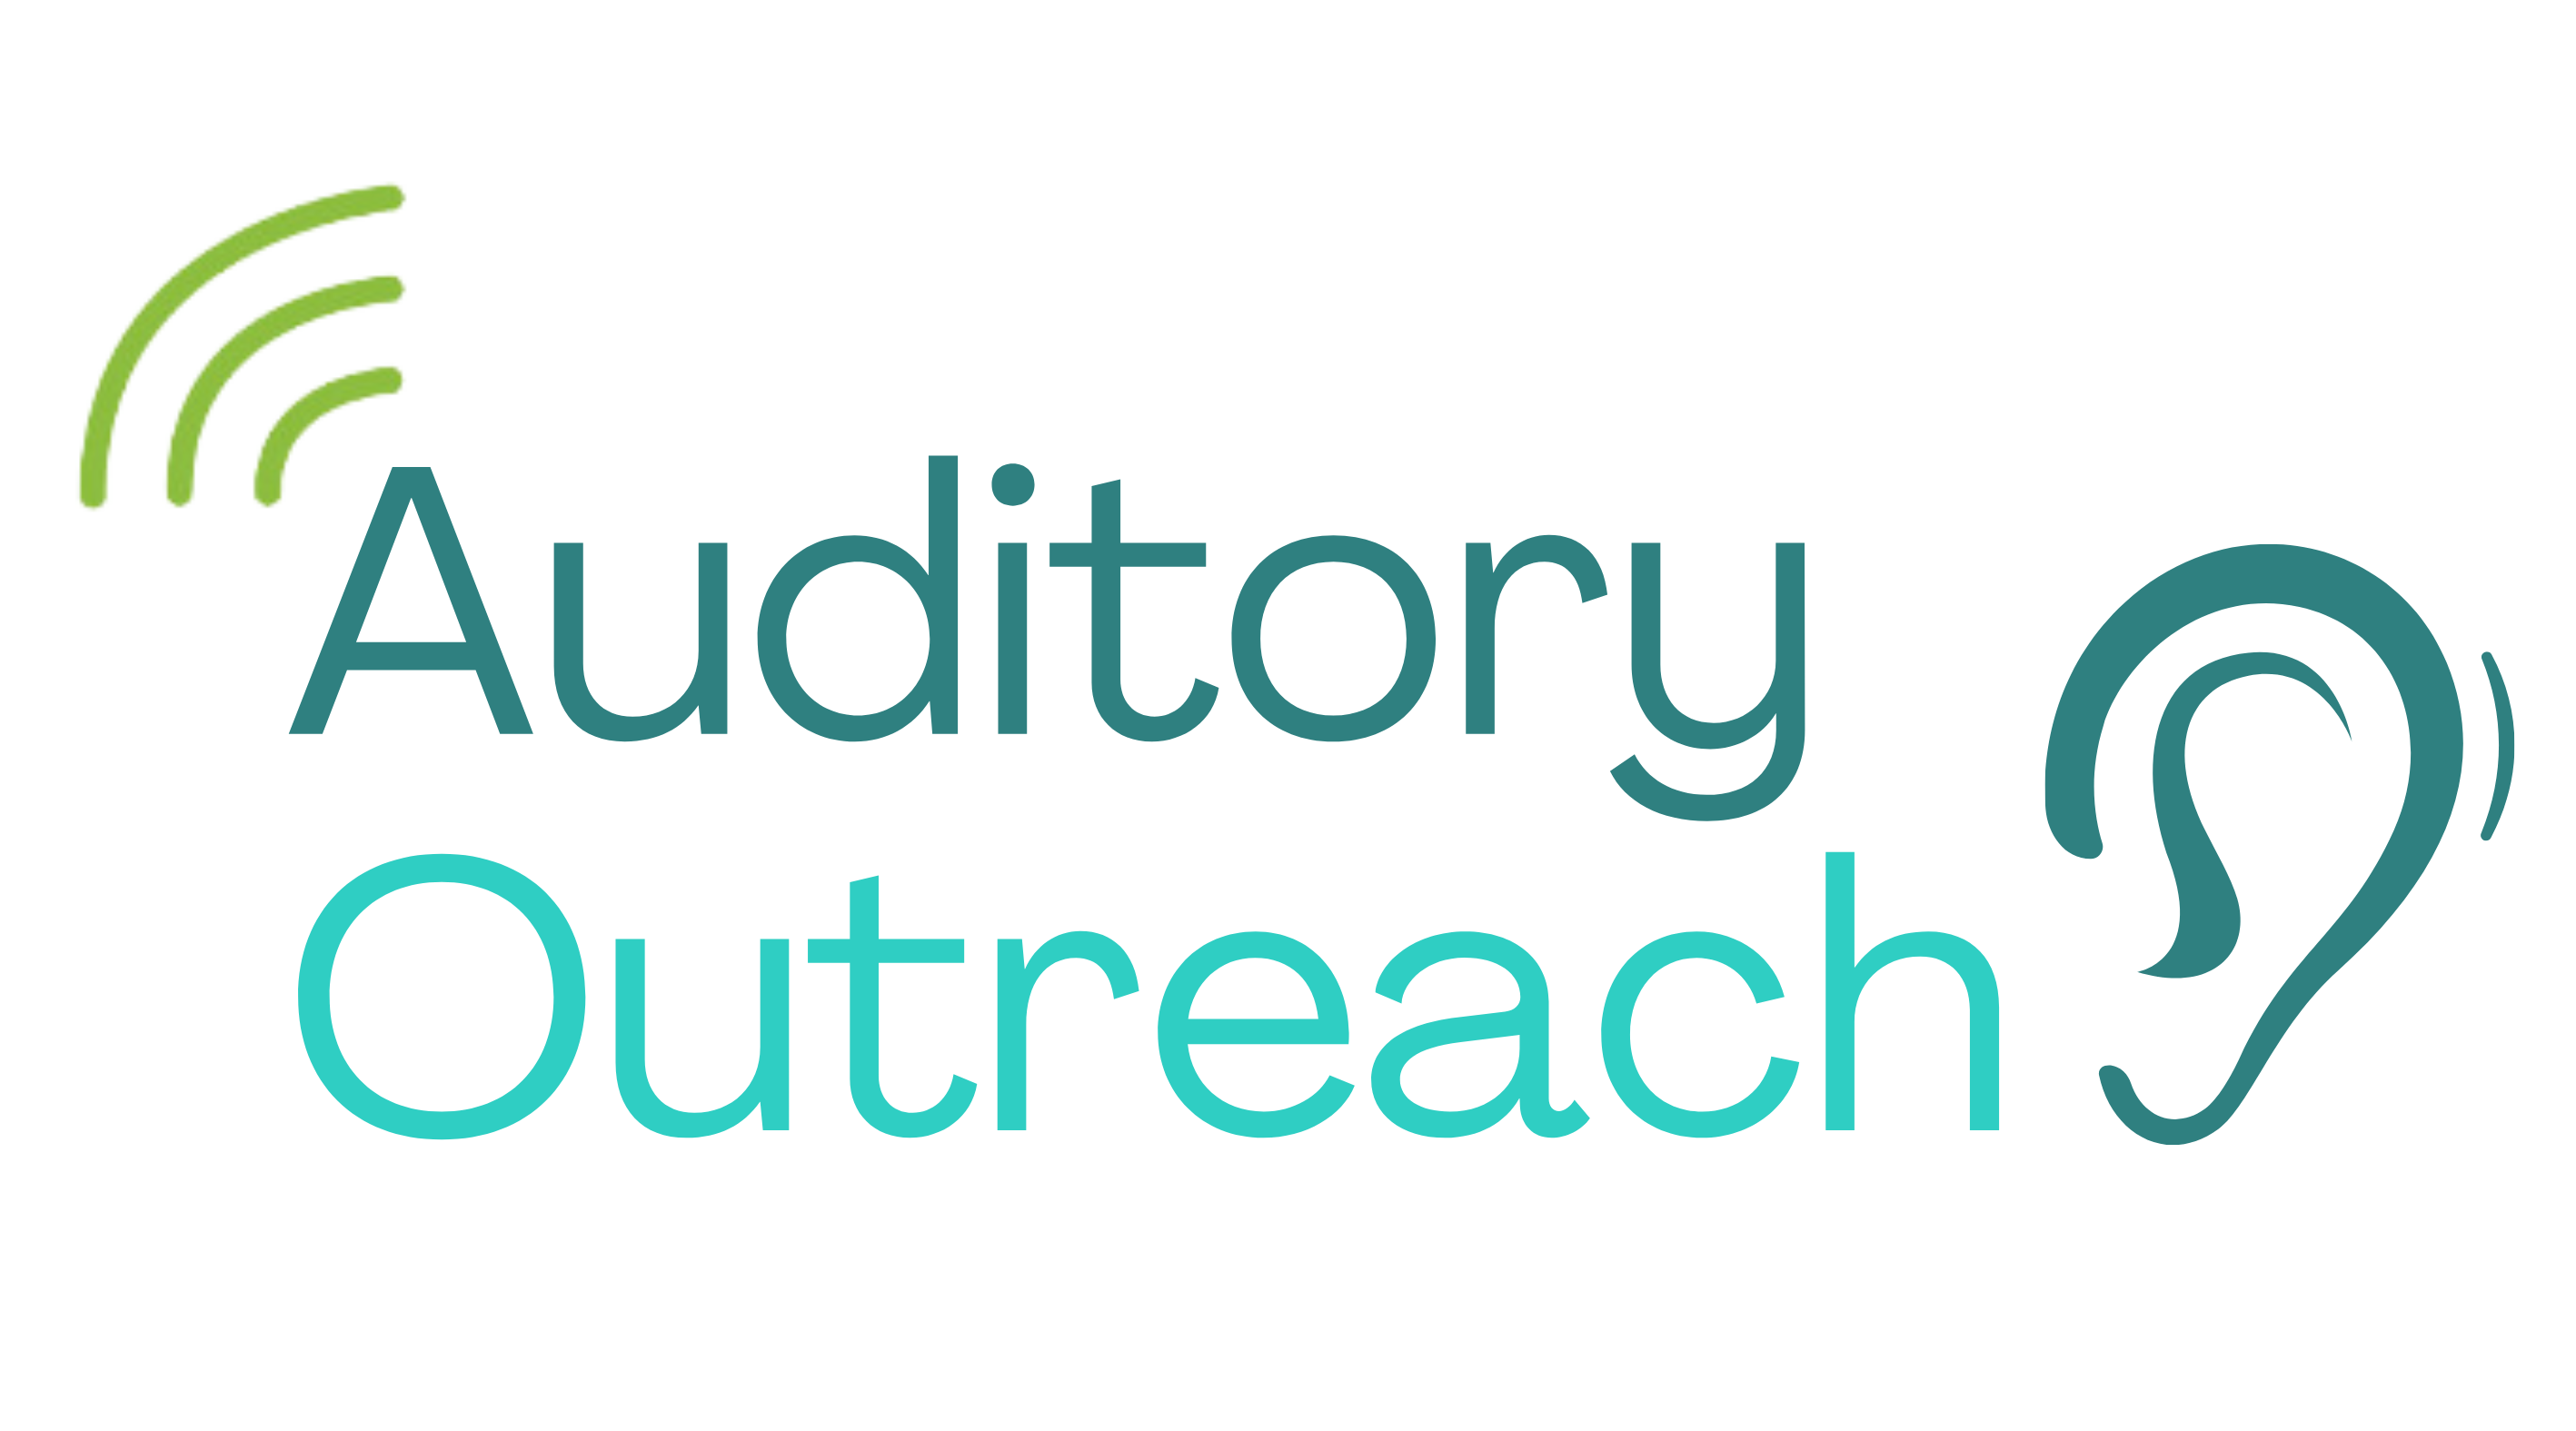 Auditory Outreach